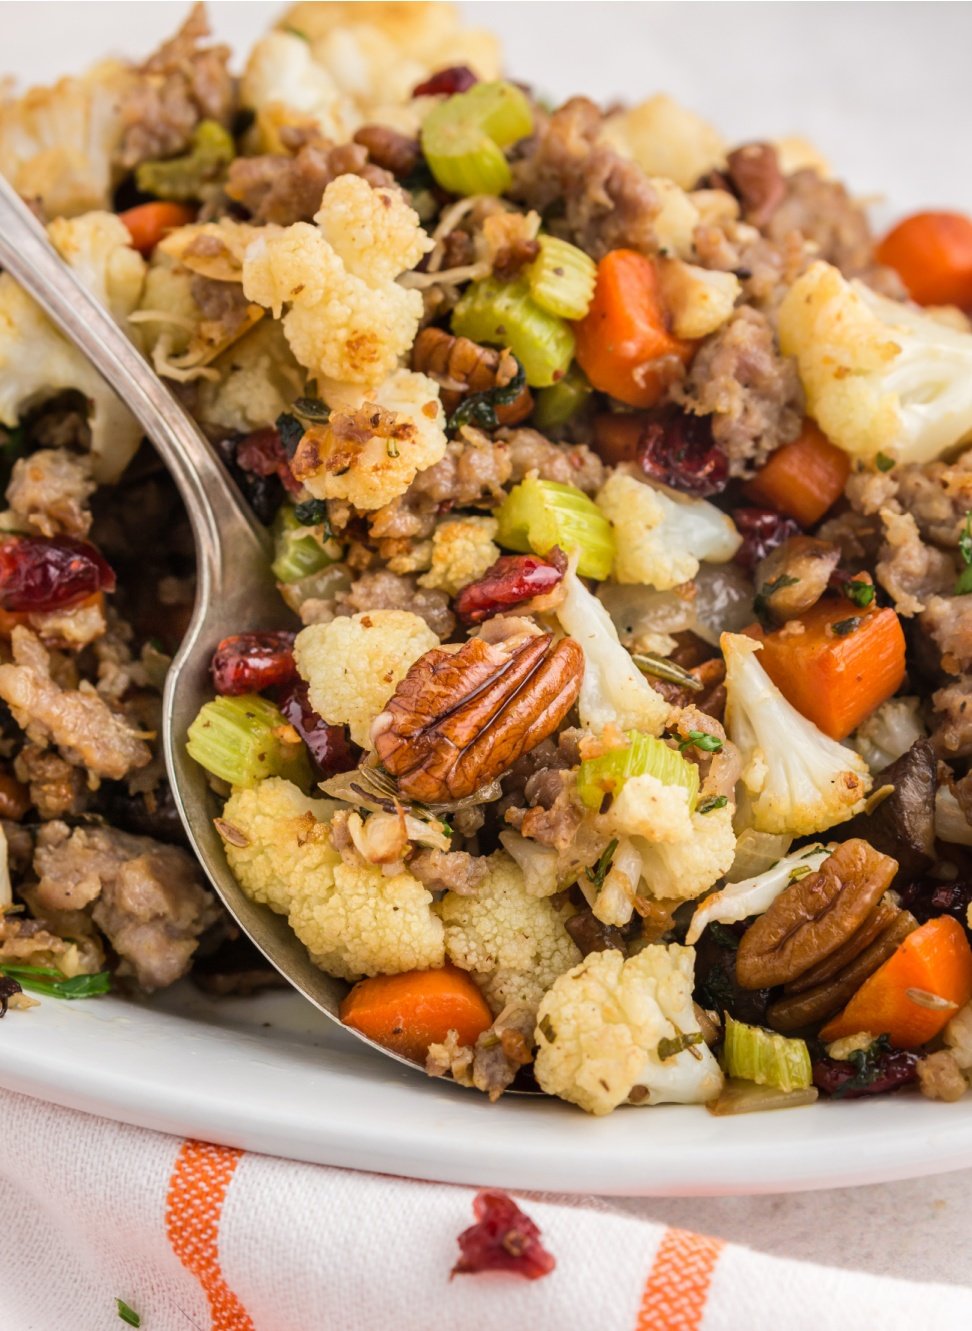 This Savory Cauliflower Stuffing tastes exactly like stuffing. It’s loaded with all the traditional flavors of onion, herbs, sausage, veggies, cranberries and nuts. via @familyfresh